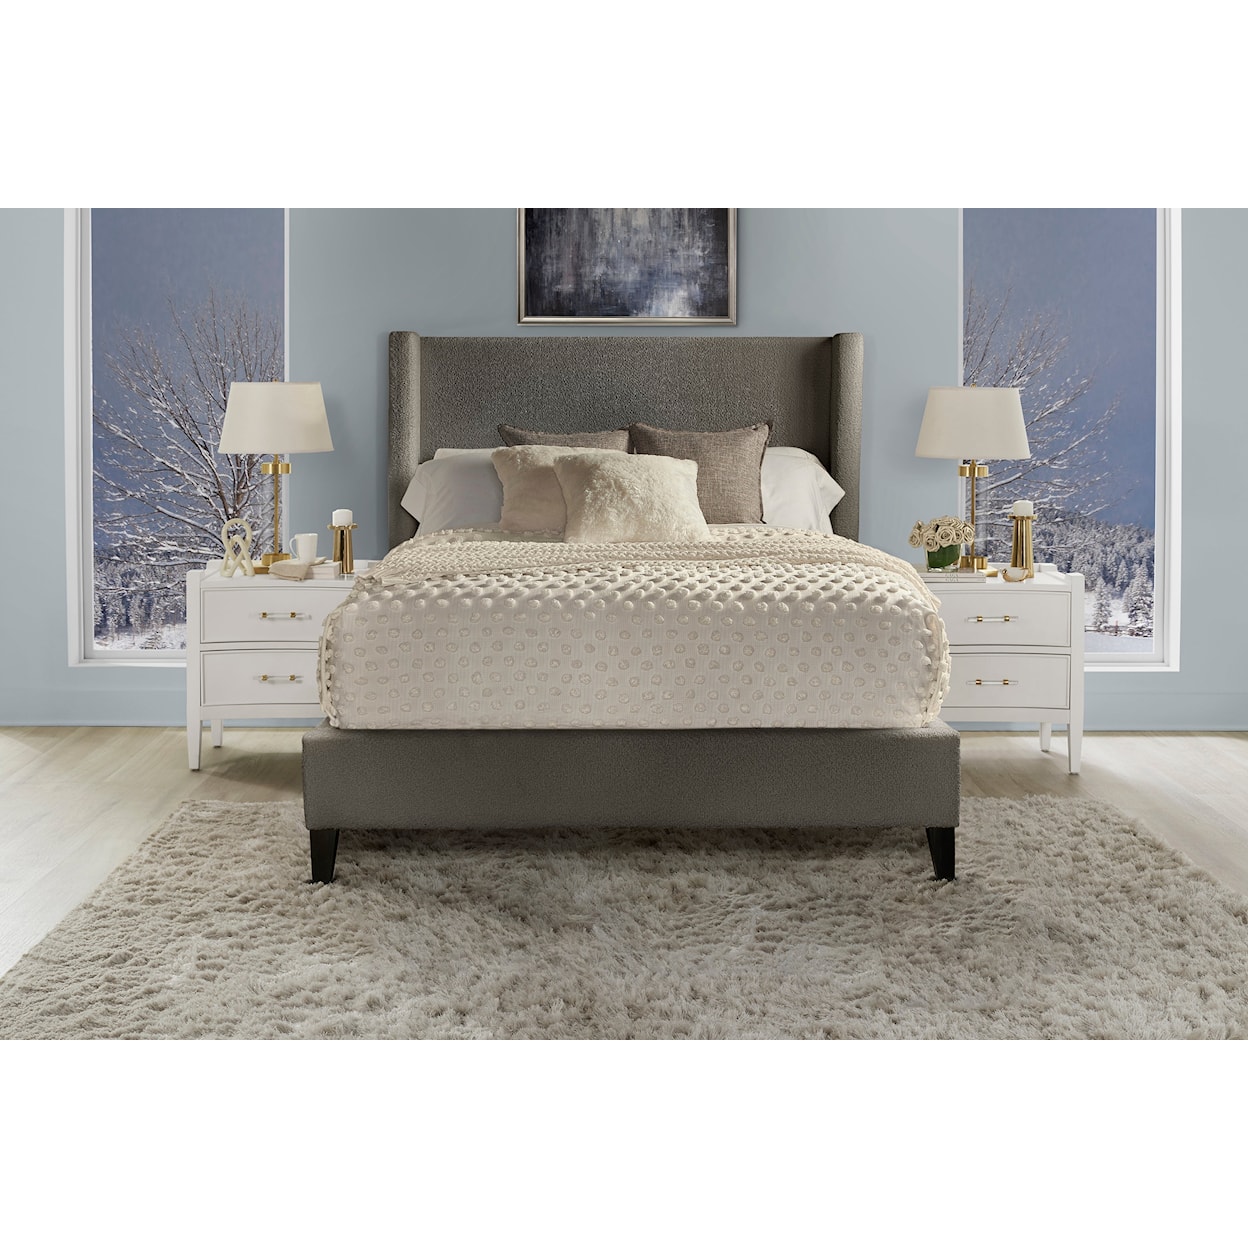 Paramount Living Angel Himalaya Charcoal Queen Bed